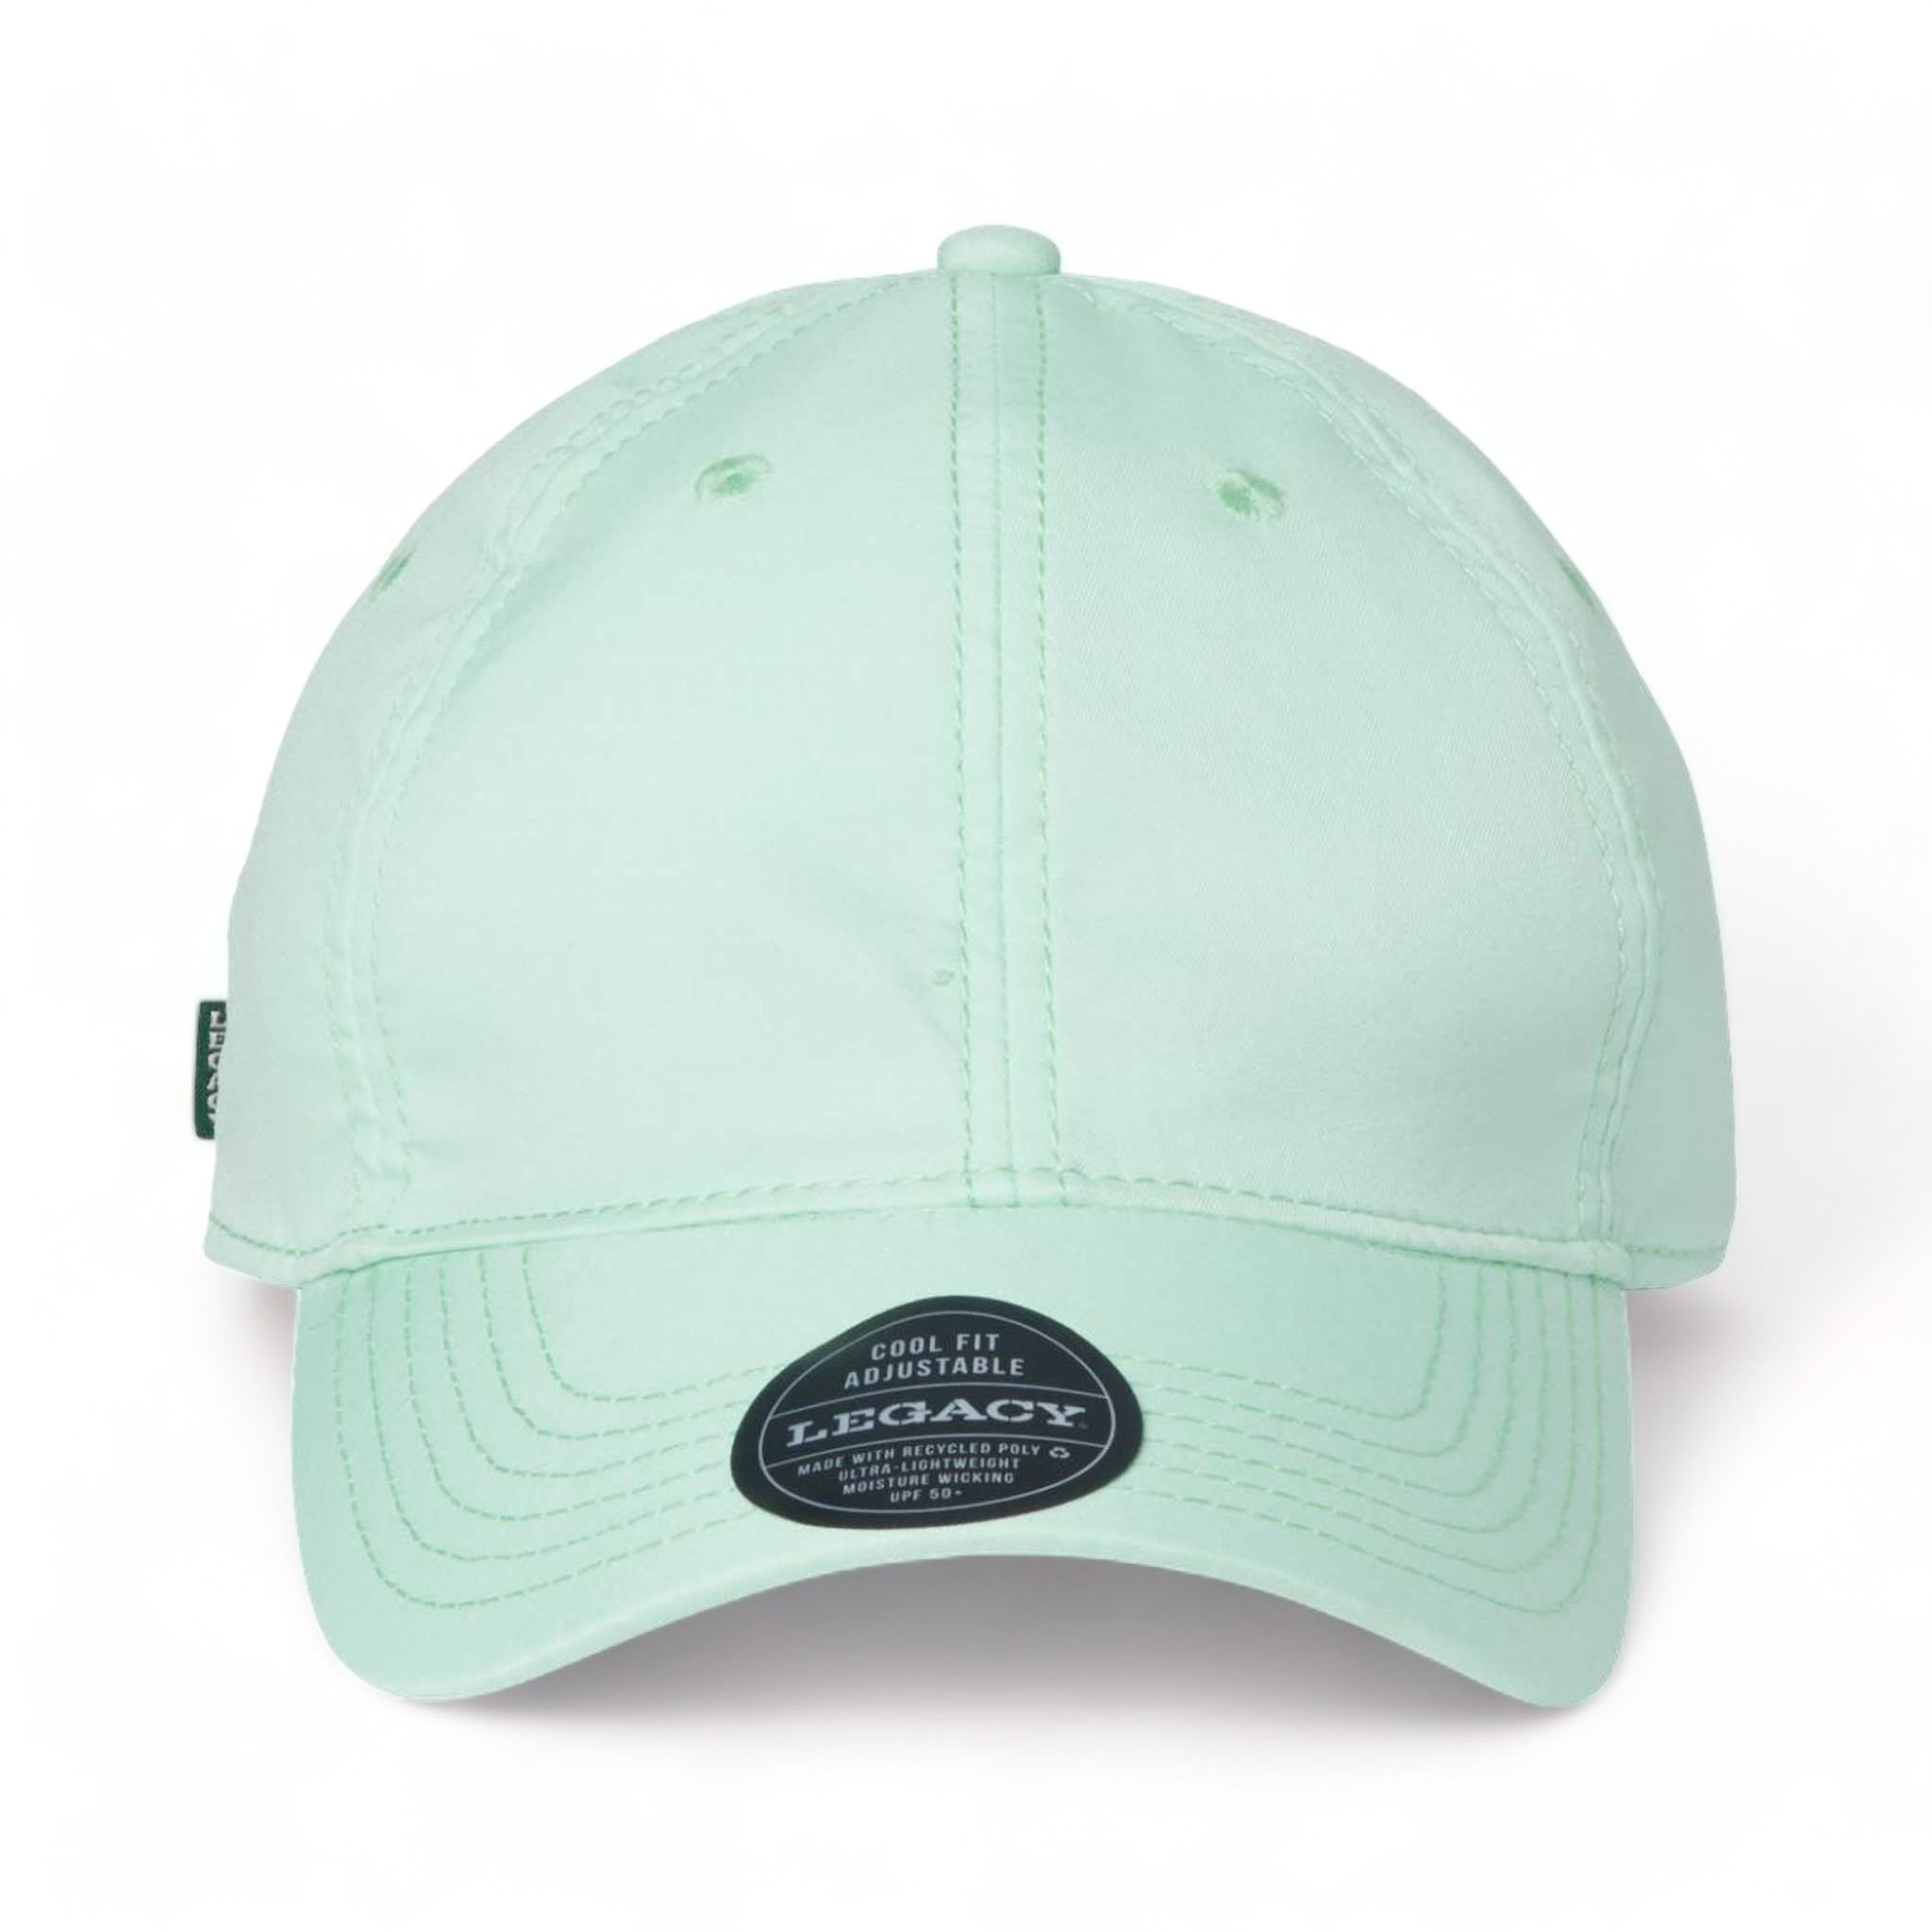 Front view of LEGACY CFA custom hat in light mint